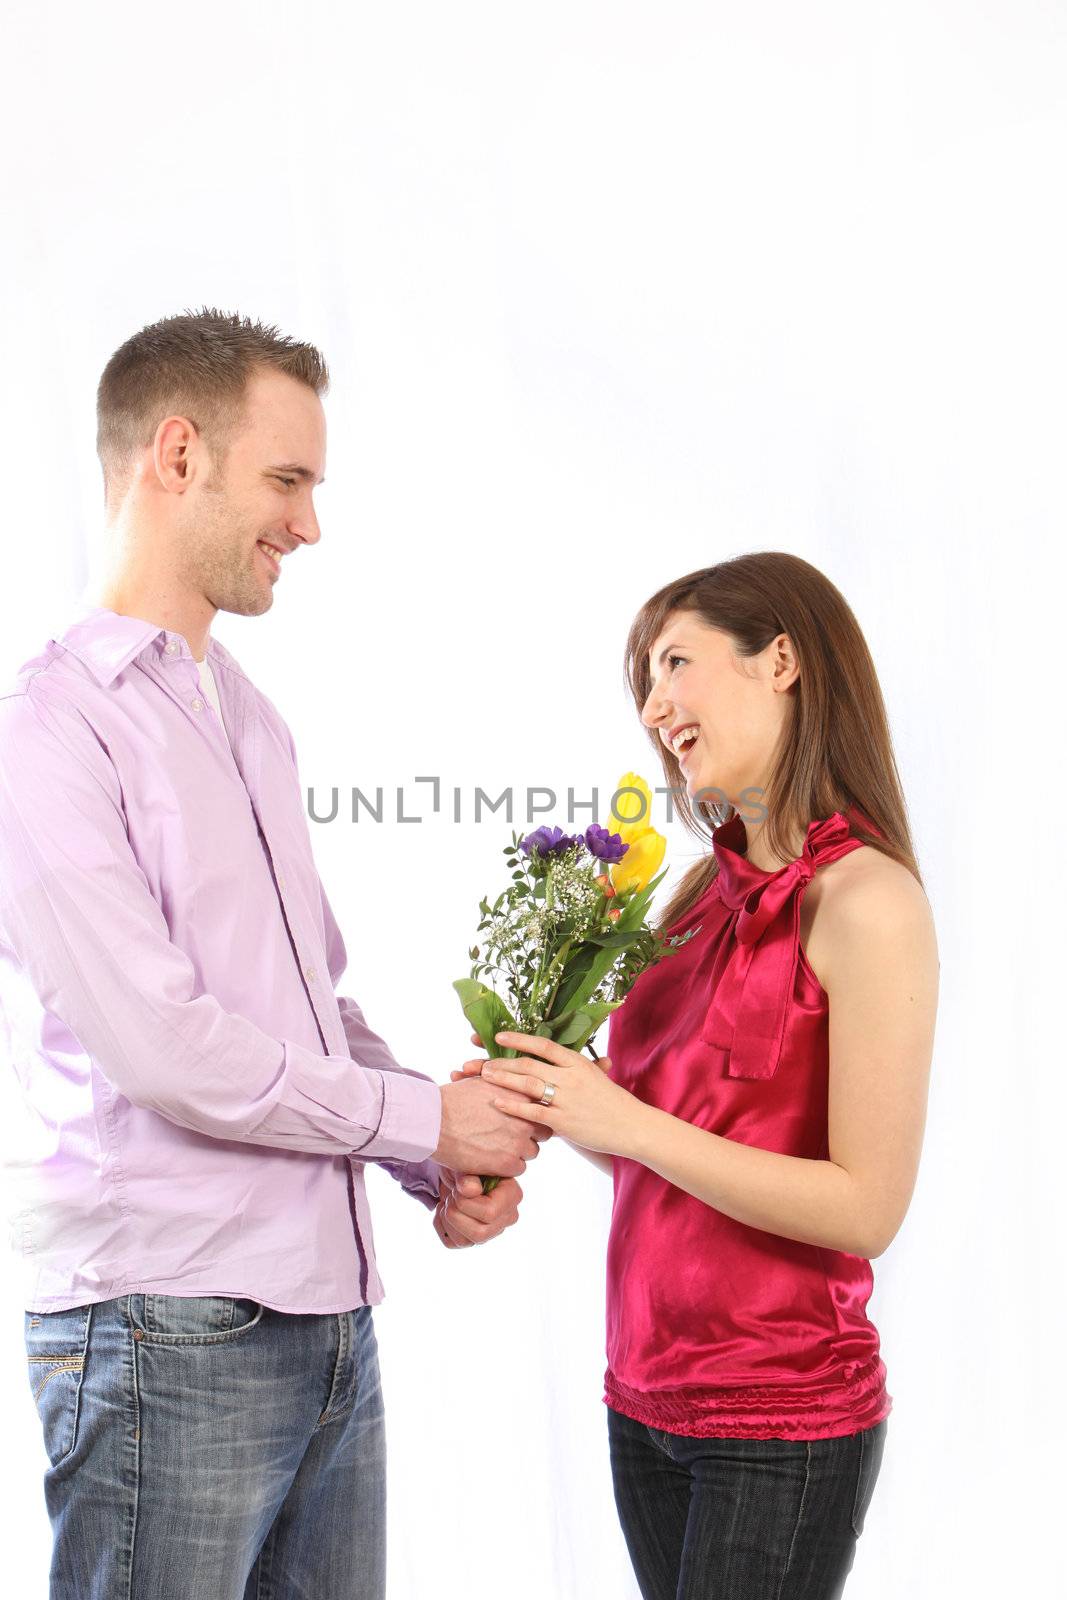 Young, happy couple. The man handed the woman a bouquet of flowers